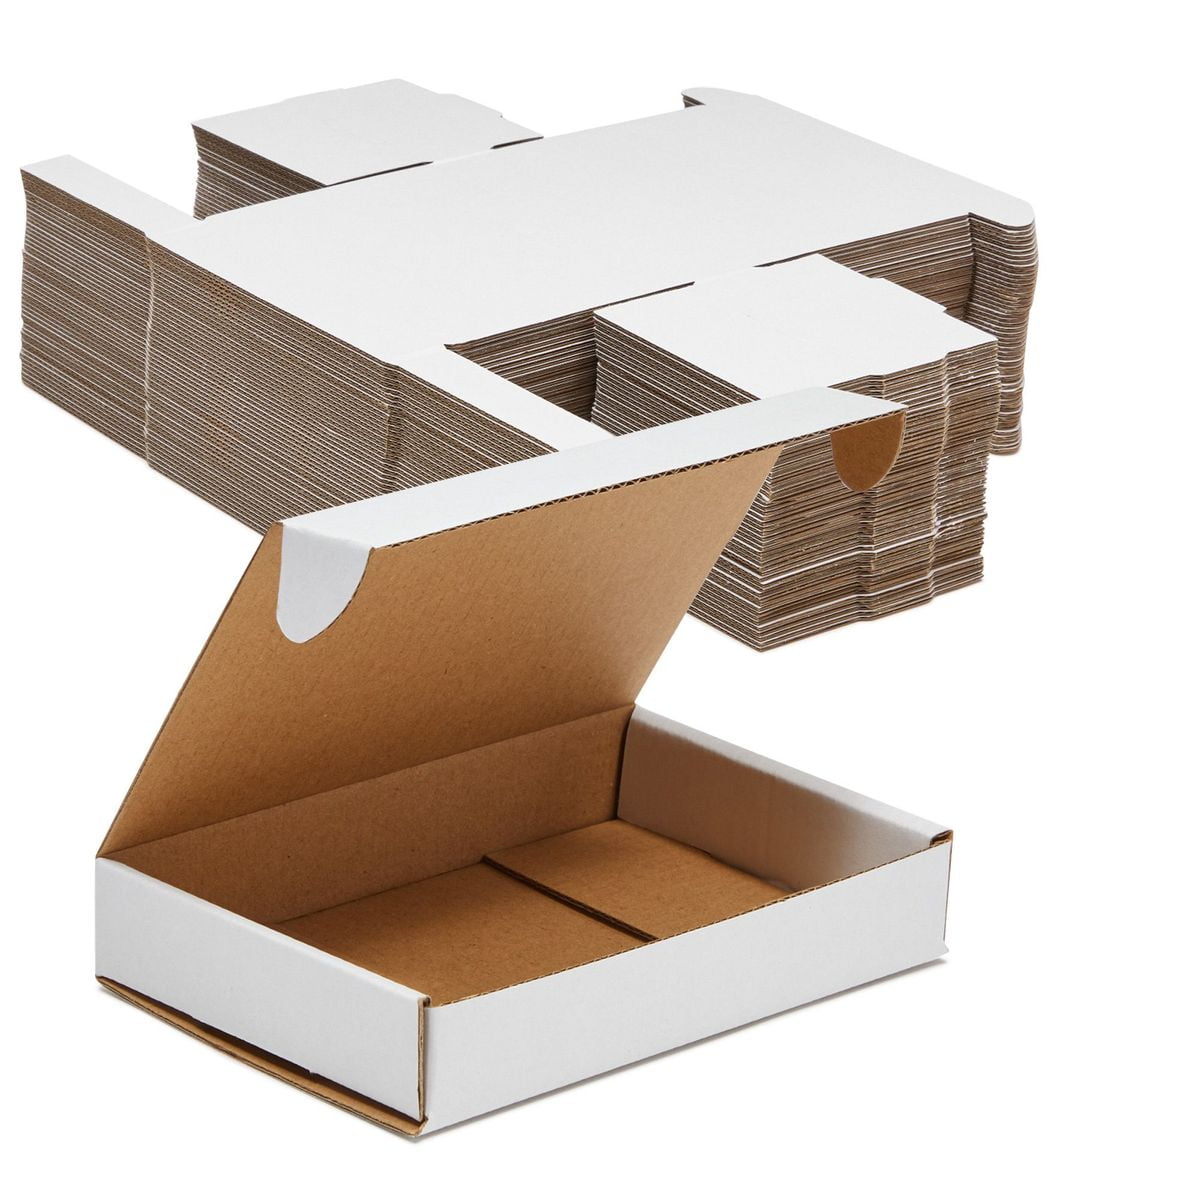 50 8x8x4 Cardboard Paper Boxes Mailing Packing Shipping Box Corrugated Carton 